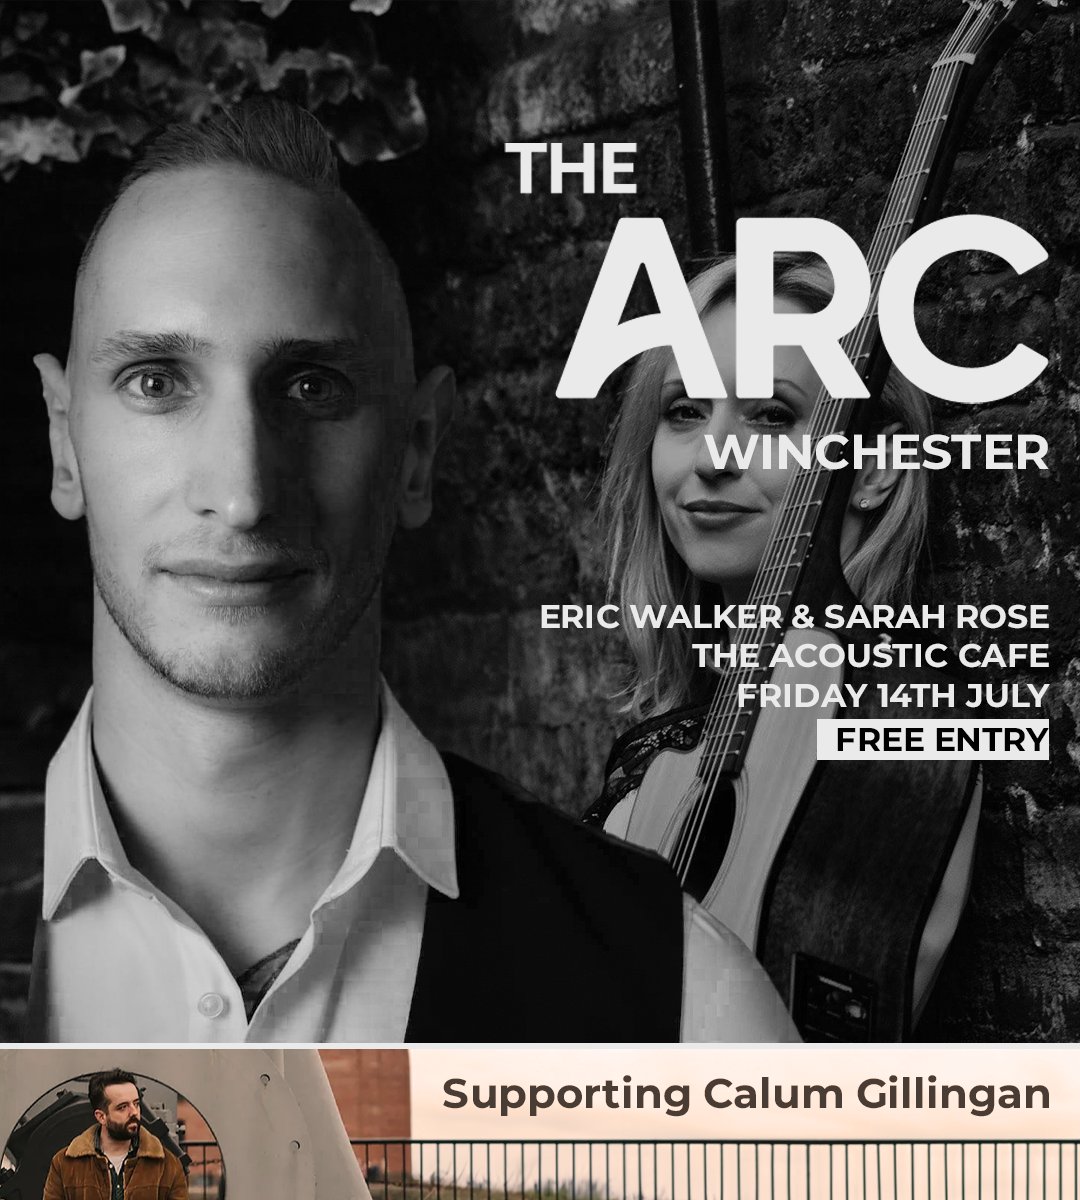 @SarahMusicSongs and I are playing in Winchester this Friday! Join us at @ArcWinchester, where we'll be supporting @gilligan_calum 🎶 it all starts at 7.30pm Plus! It's free entry 😍 #songwriter #musician #singer #independentartist #winchester